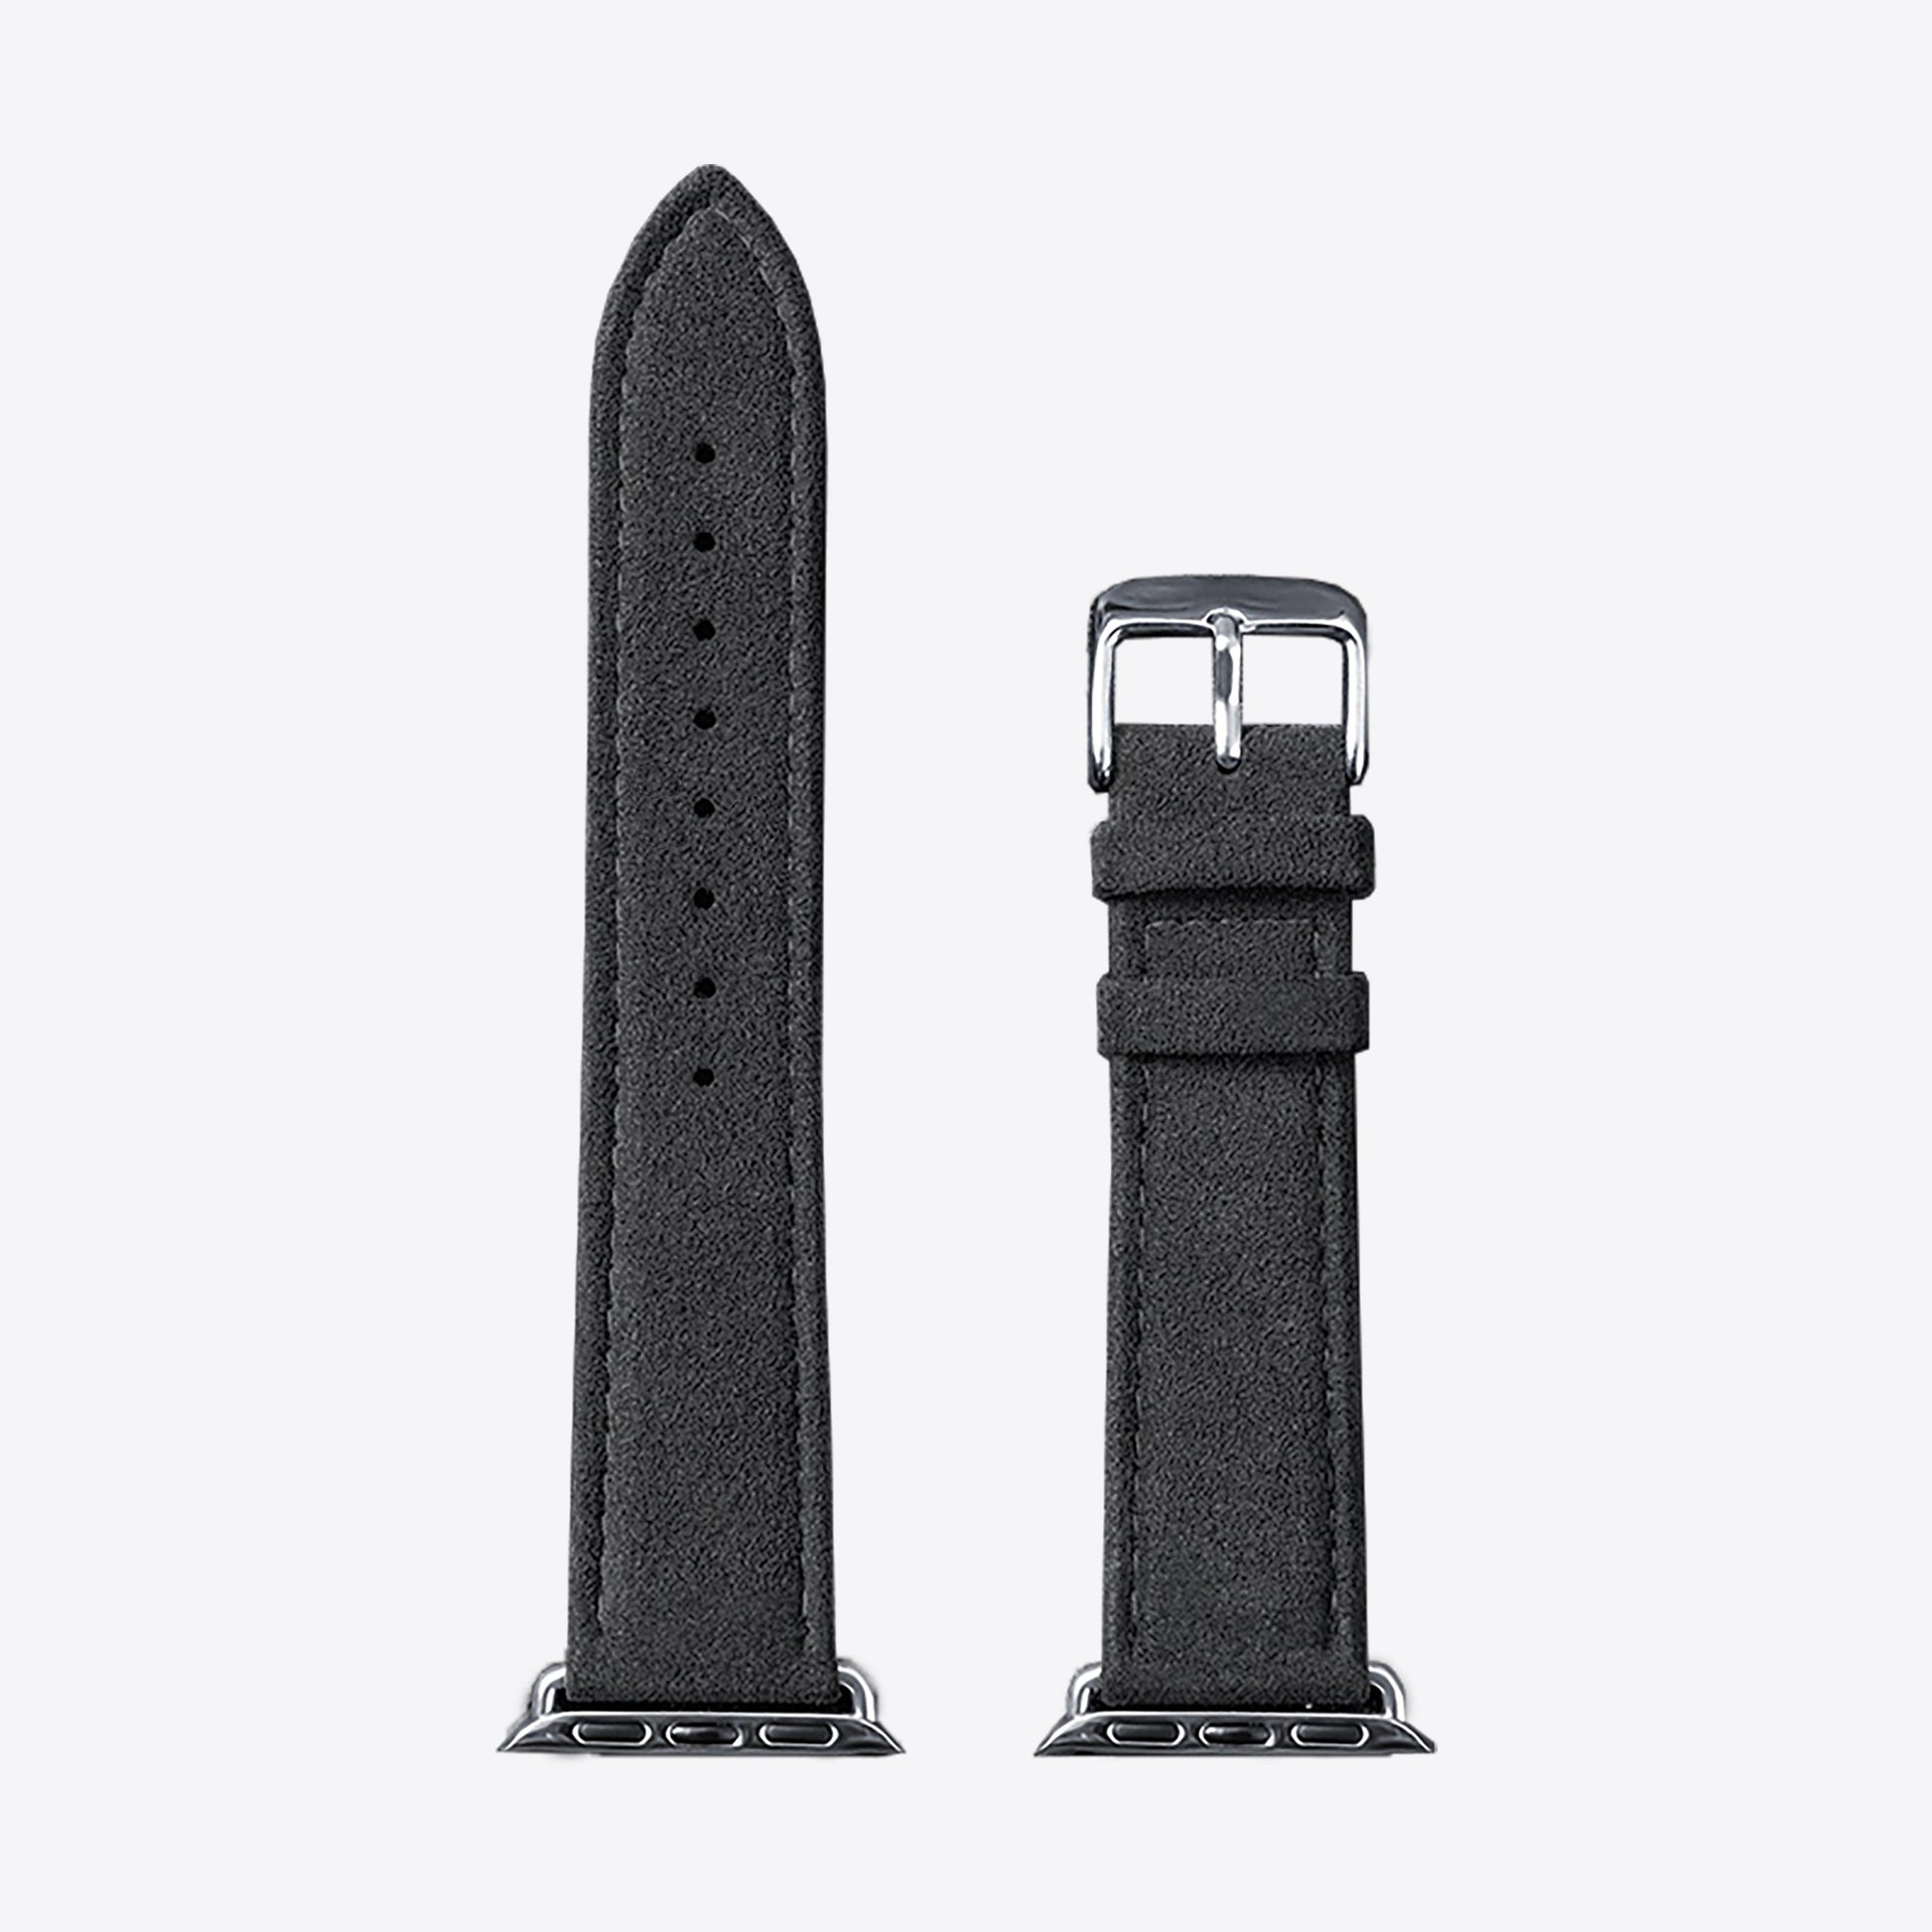 Alcantara Suede Leather iPhone Case and Accessories Collection - The Classic Bands - Charcoal Black - Luriax